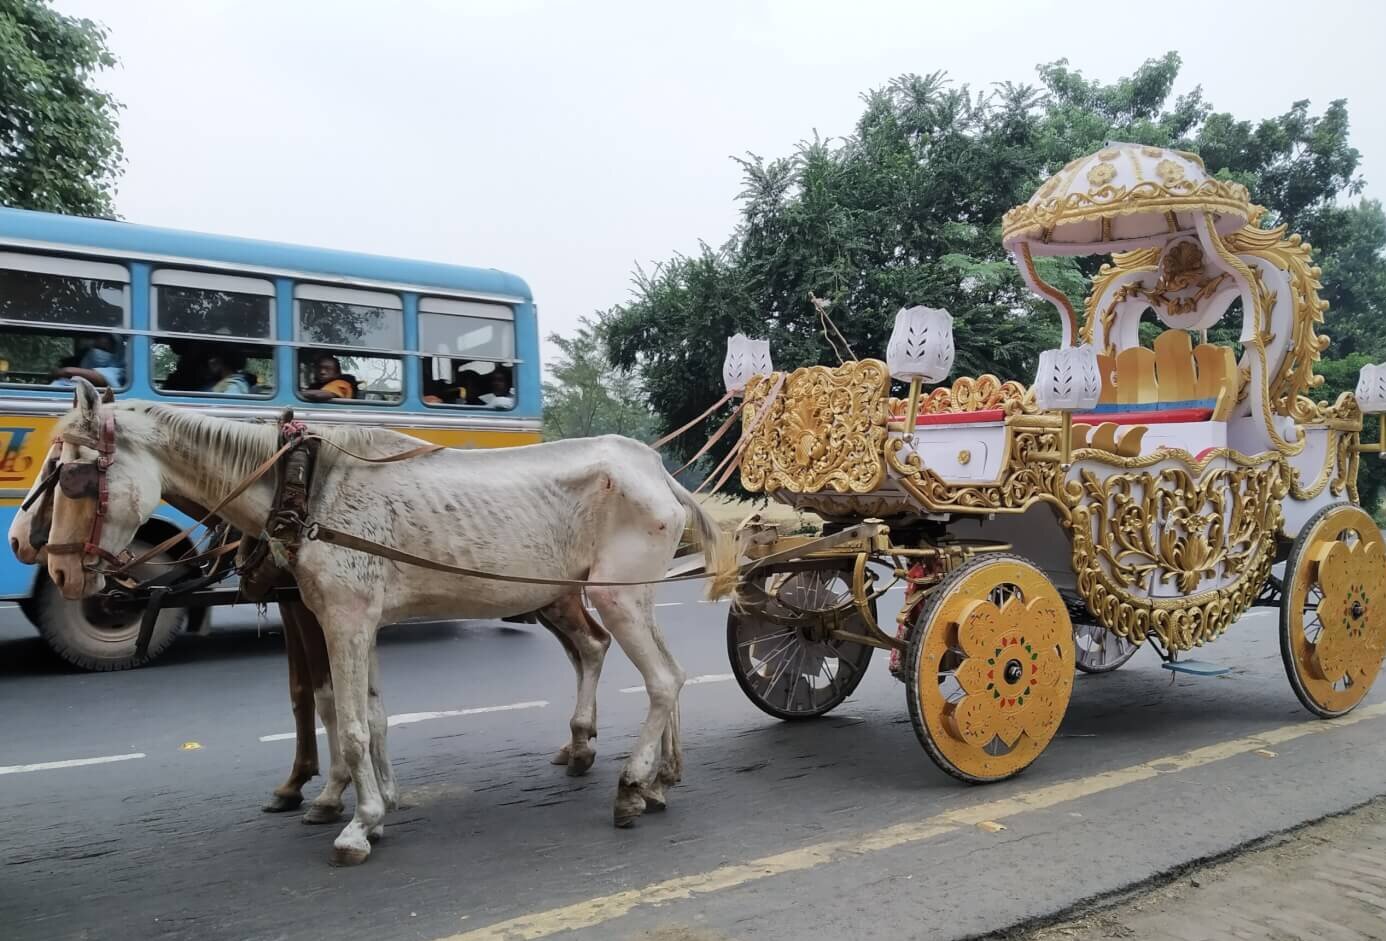 New Investigation Exposes Need to End Horse-Drawn Carriages in Kolkata